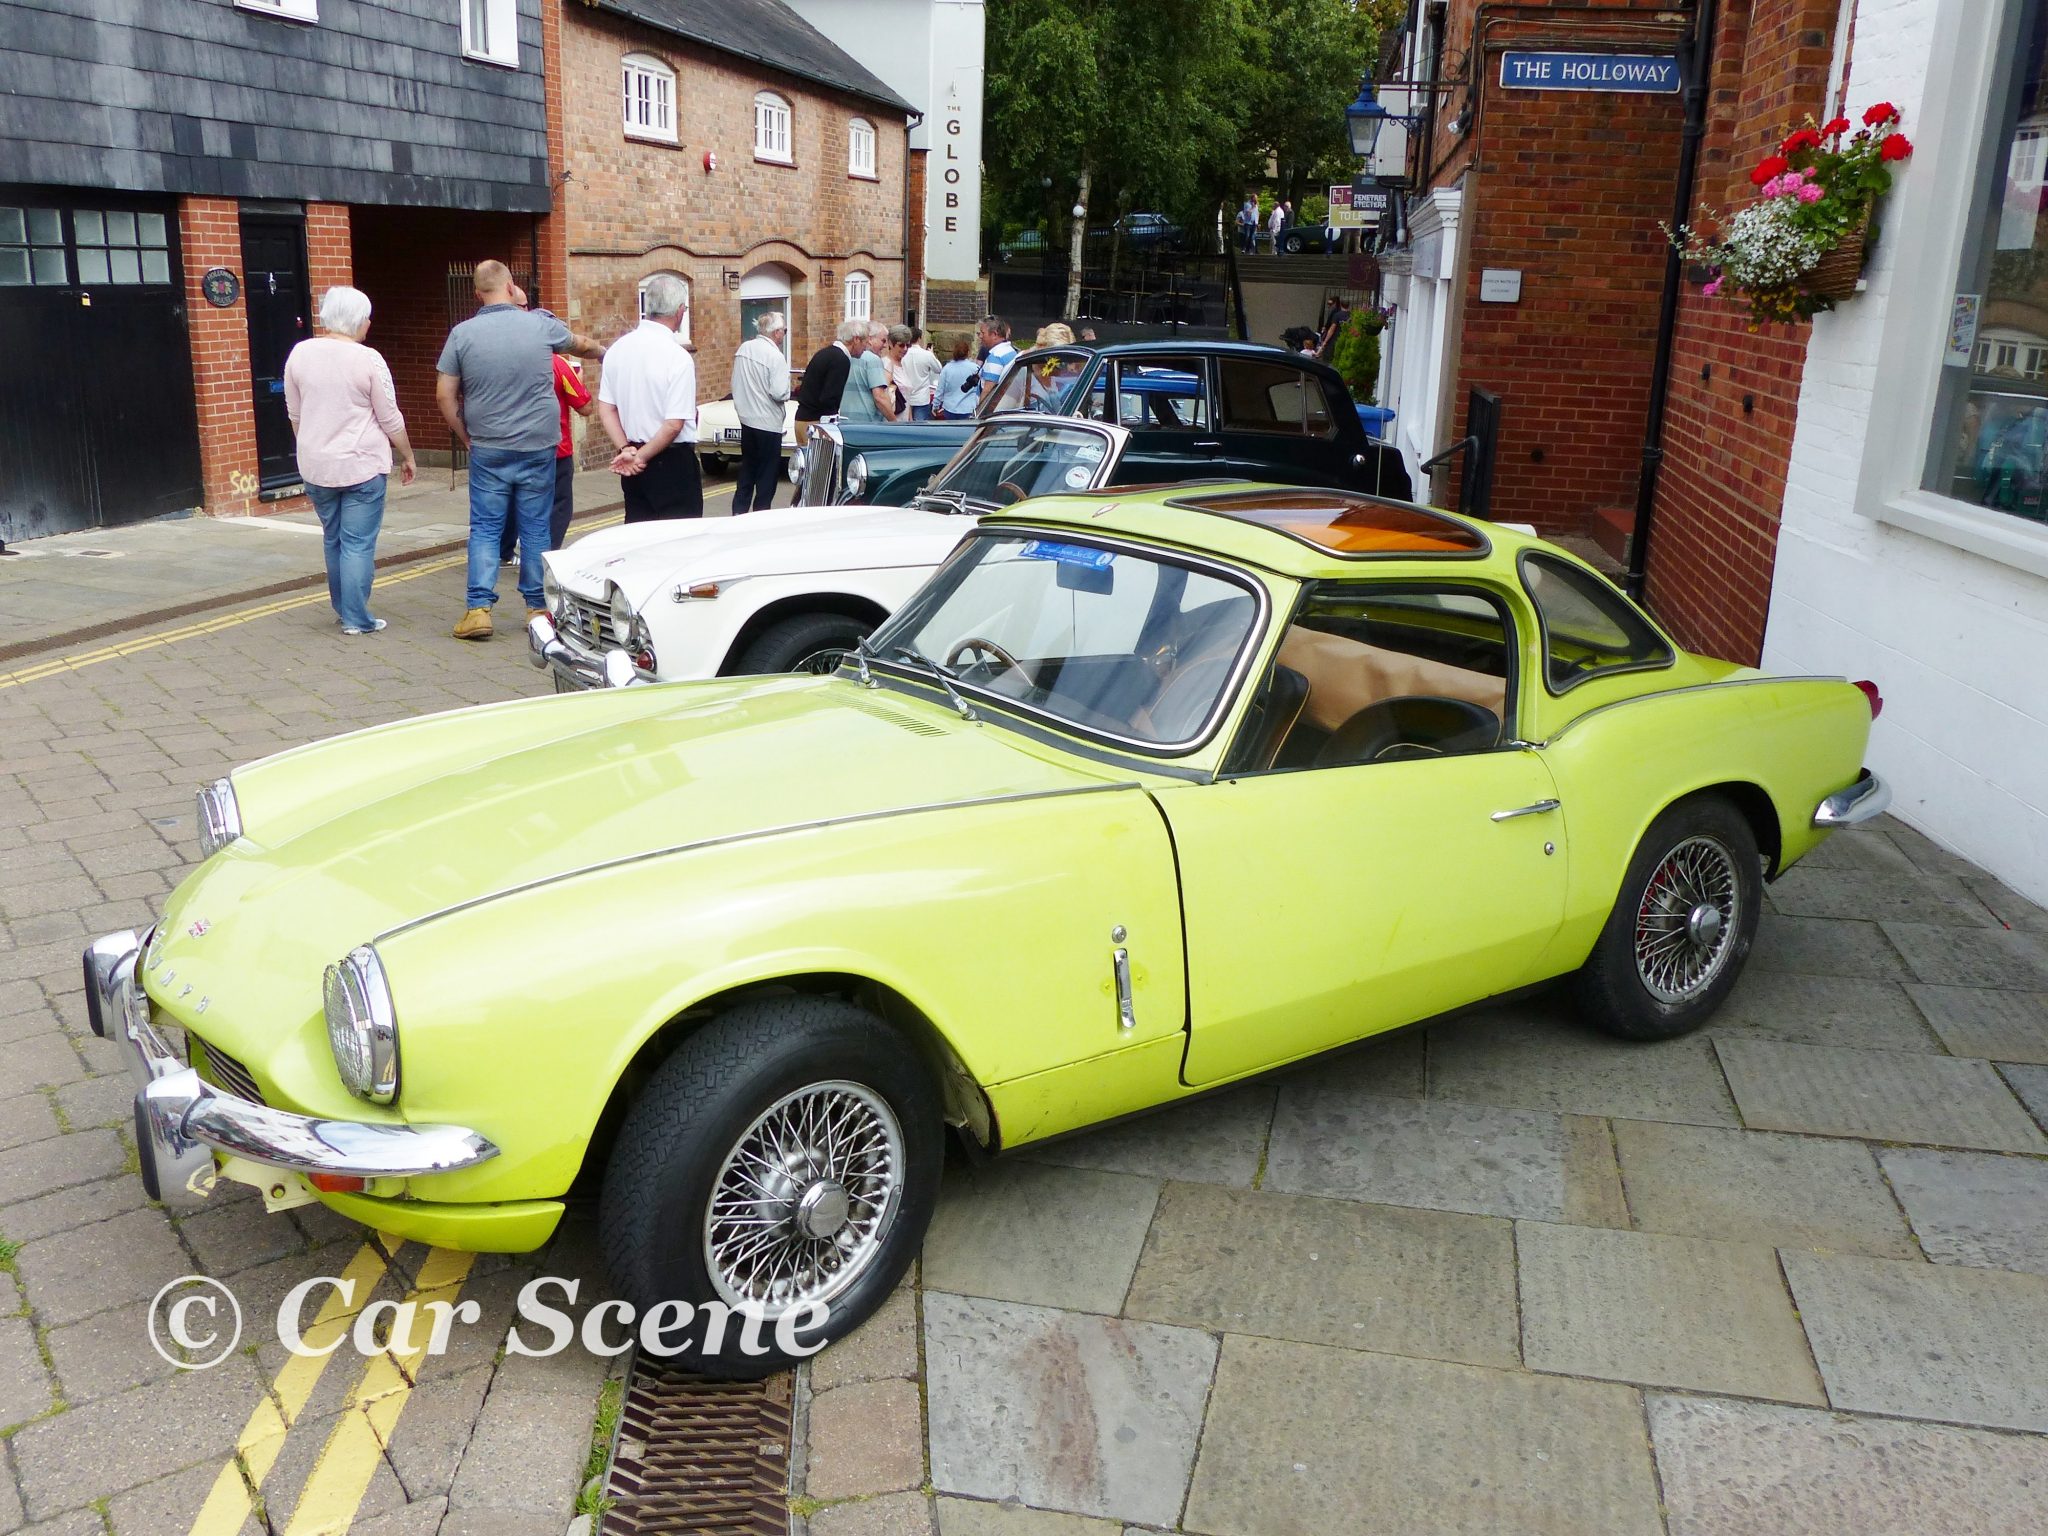 1970 Triumph Spitfire Mk. III with Hardtop front side view